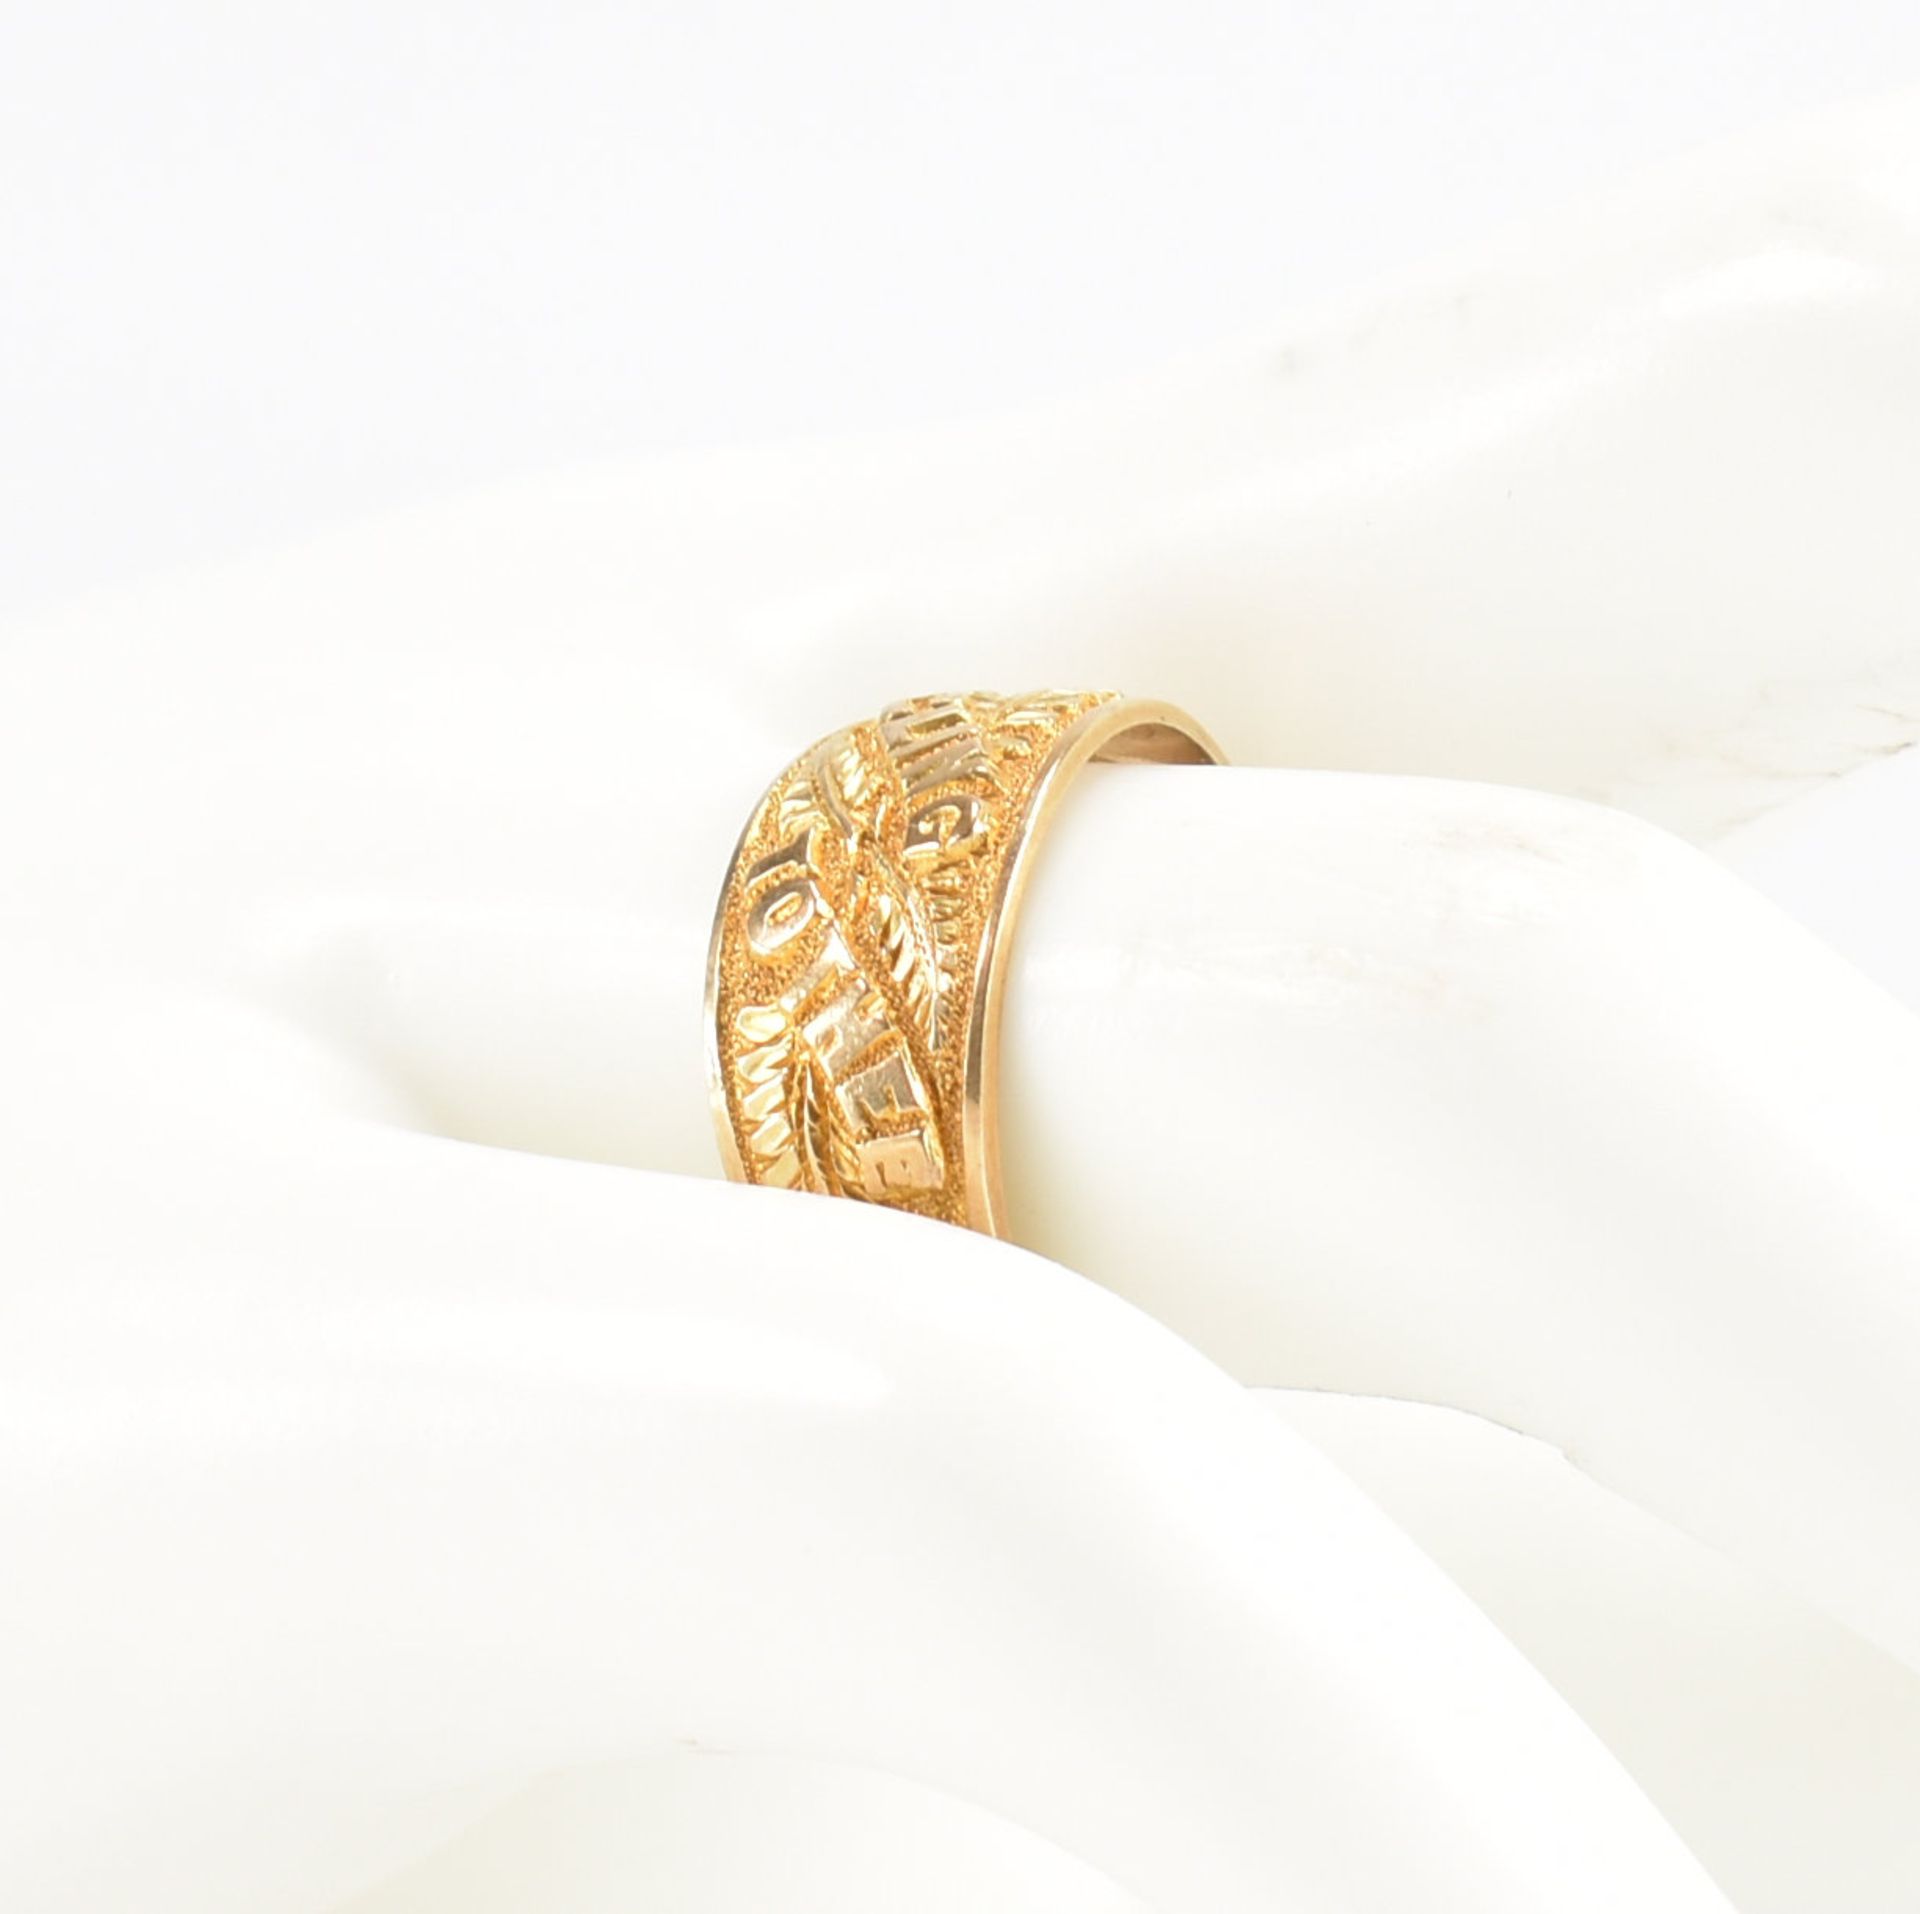 HALLMARKED VICTORIAN 9CT GOLD ETCHED BAND RING - Image 8 of 8